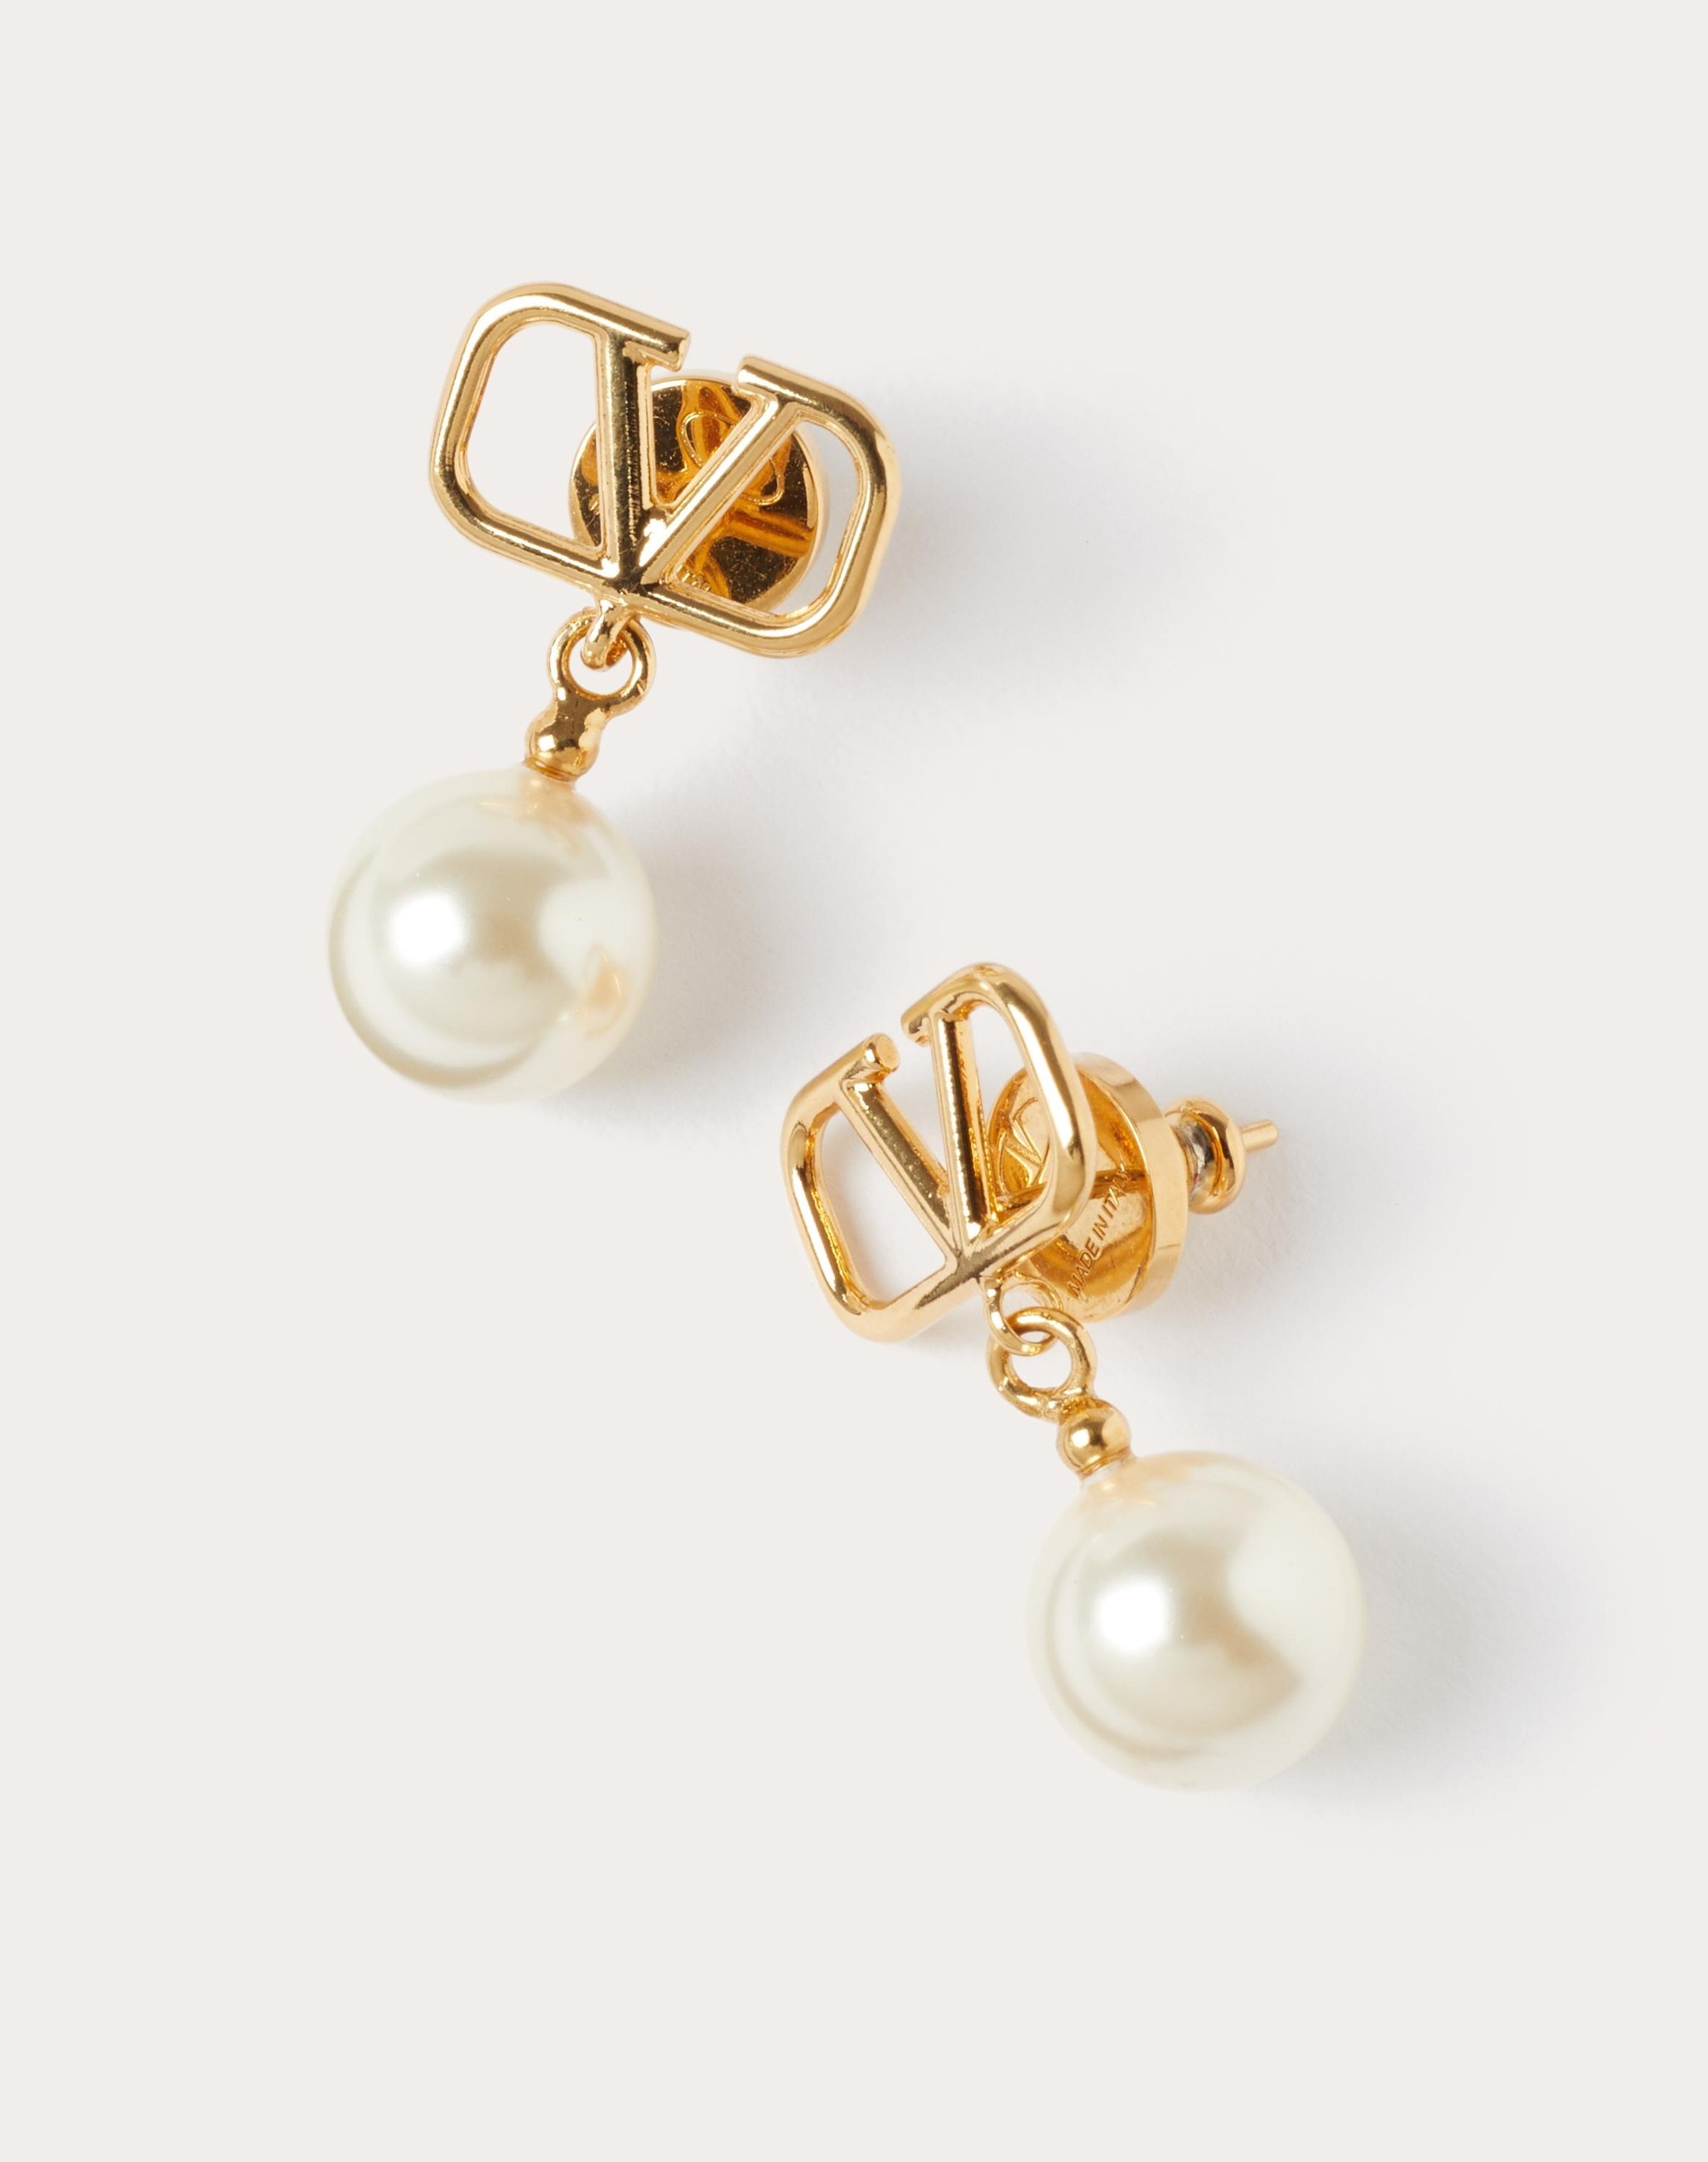 VLOGO SIGNATURE EARRINGS WITH SWAROVSKI® PEARLS - 3